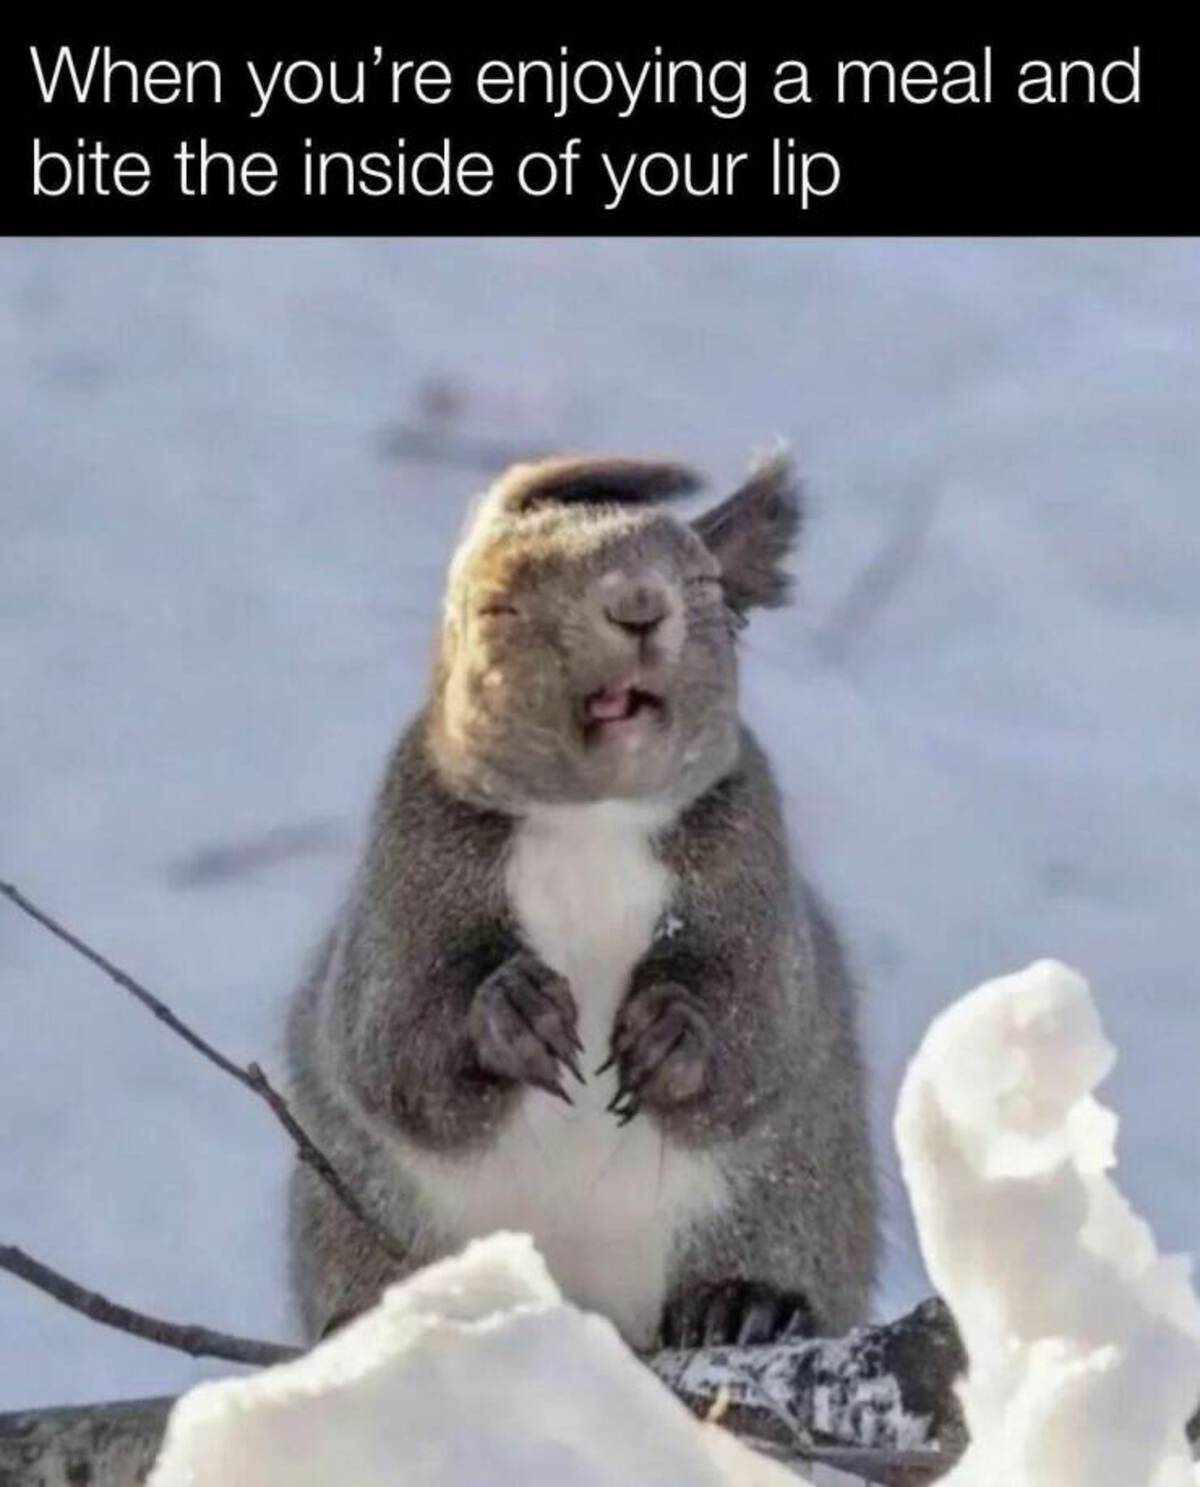 squirrel being hit by a gust of wind - When you're enjoying a meal and bite the inside of your lip